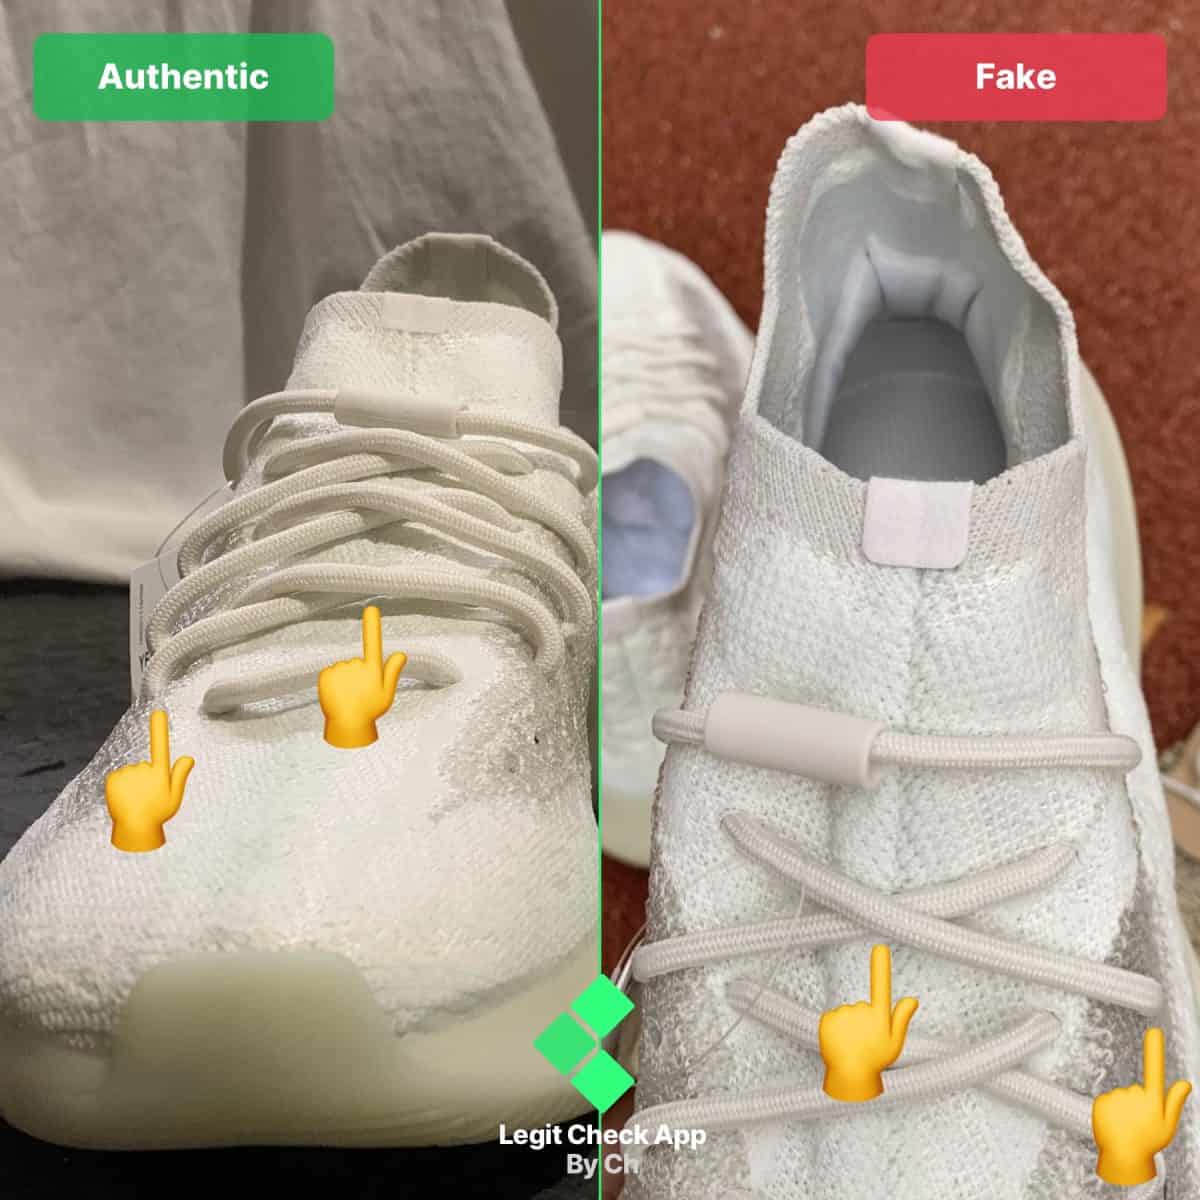 yeezy 380 calcite glow authenticity check guide